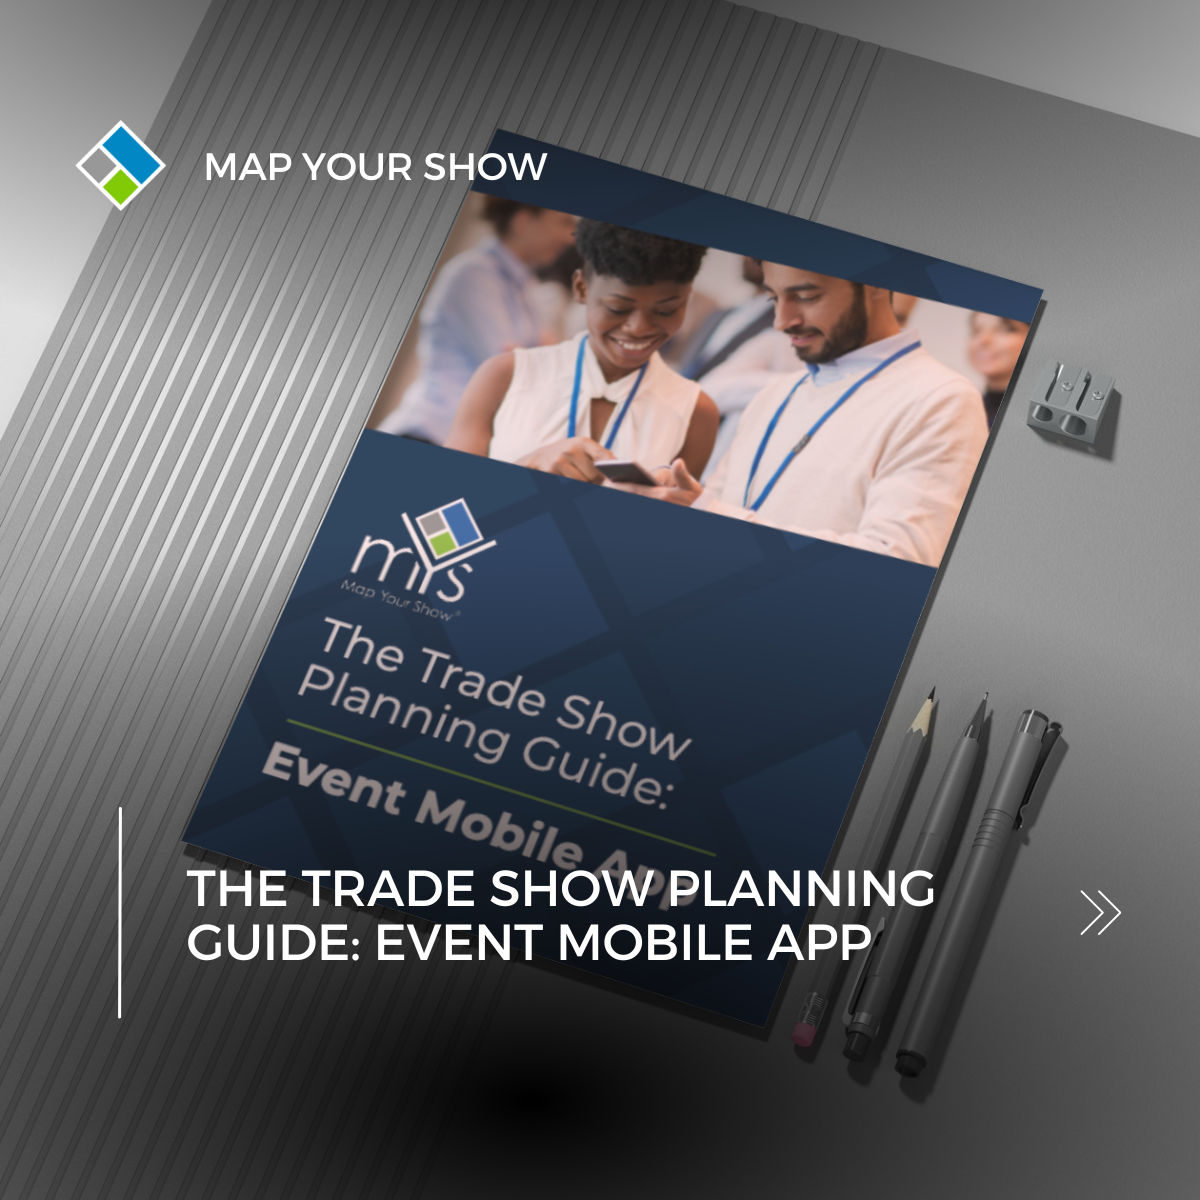 The Trade Show Planning Guide: Event Mobile App by Map Your Show